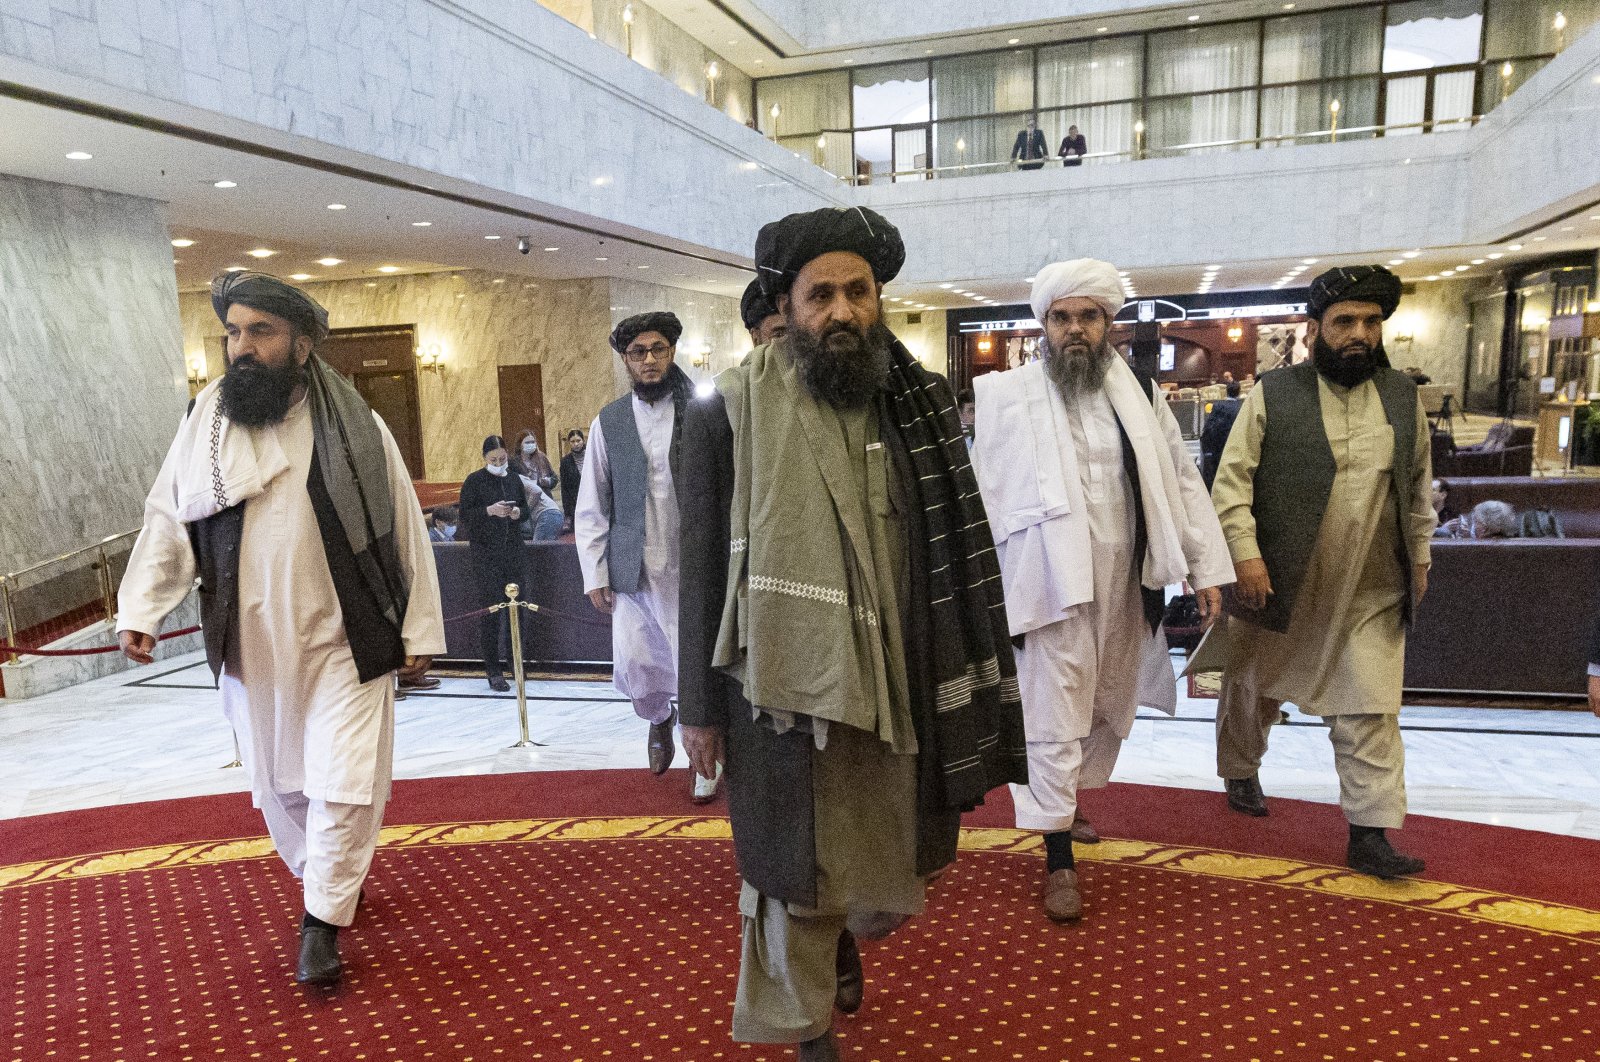 Taliban co-founder Mullah Abdul Ghani Baradar (C) arrives with other members of the Taliban delegation to attend an international peace conference in Moscow, Russia, March 18, 2021. (EPA-EFE Photo)